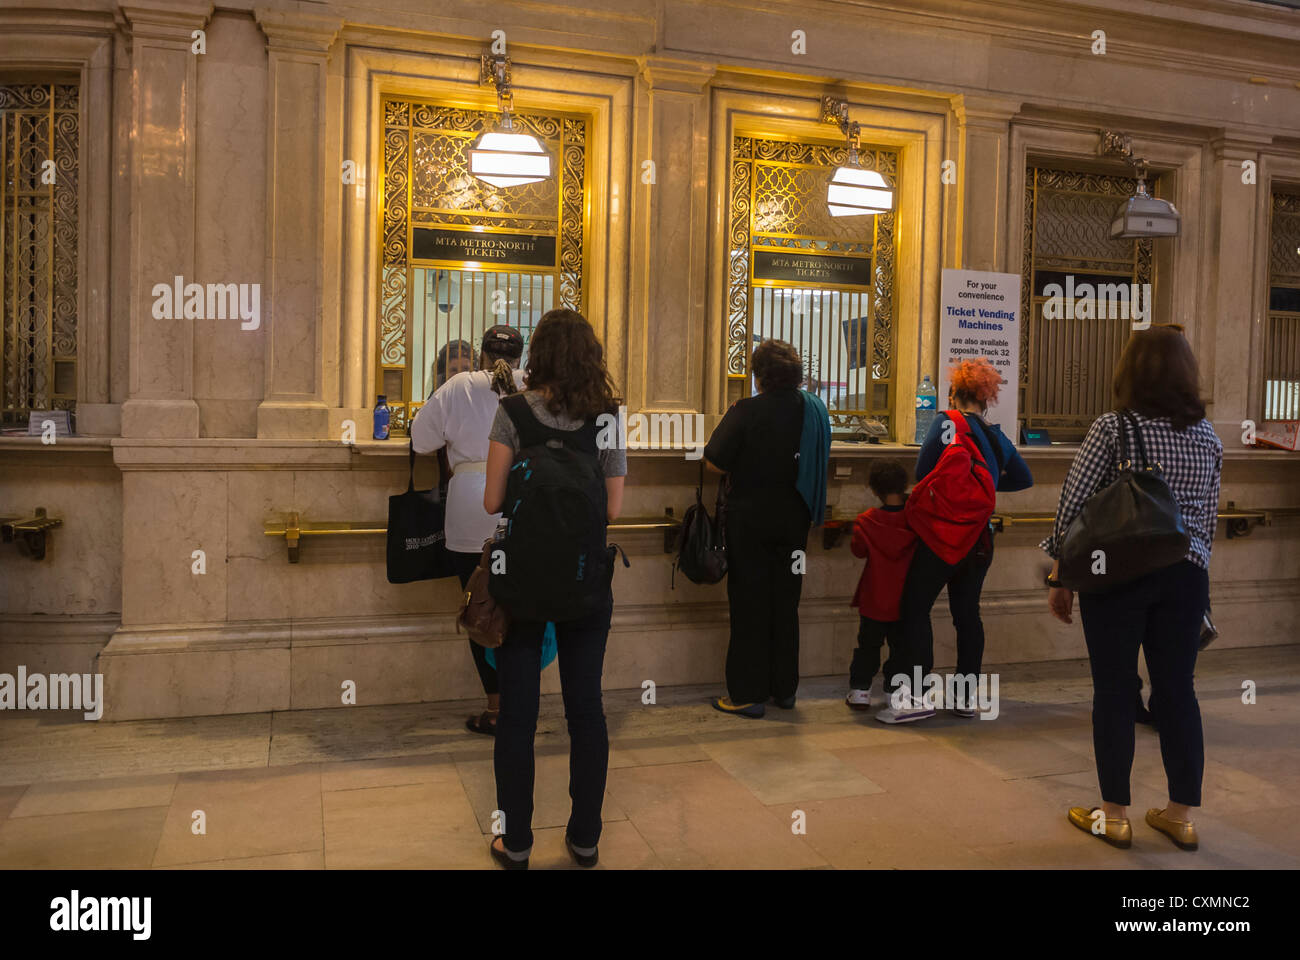 New York, NY, USA, Travelers Buying Tickets at Windows, Grand Central Train Station Building, Manhattan Stock Photo